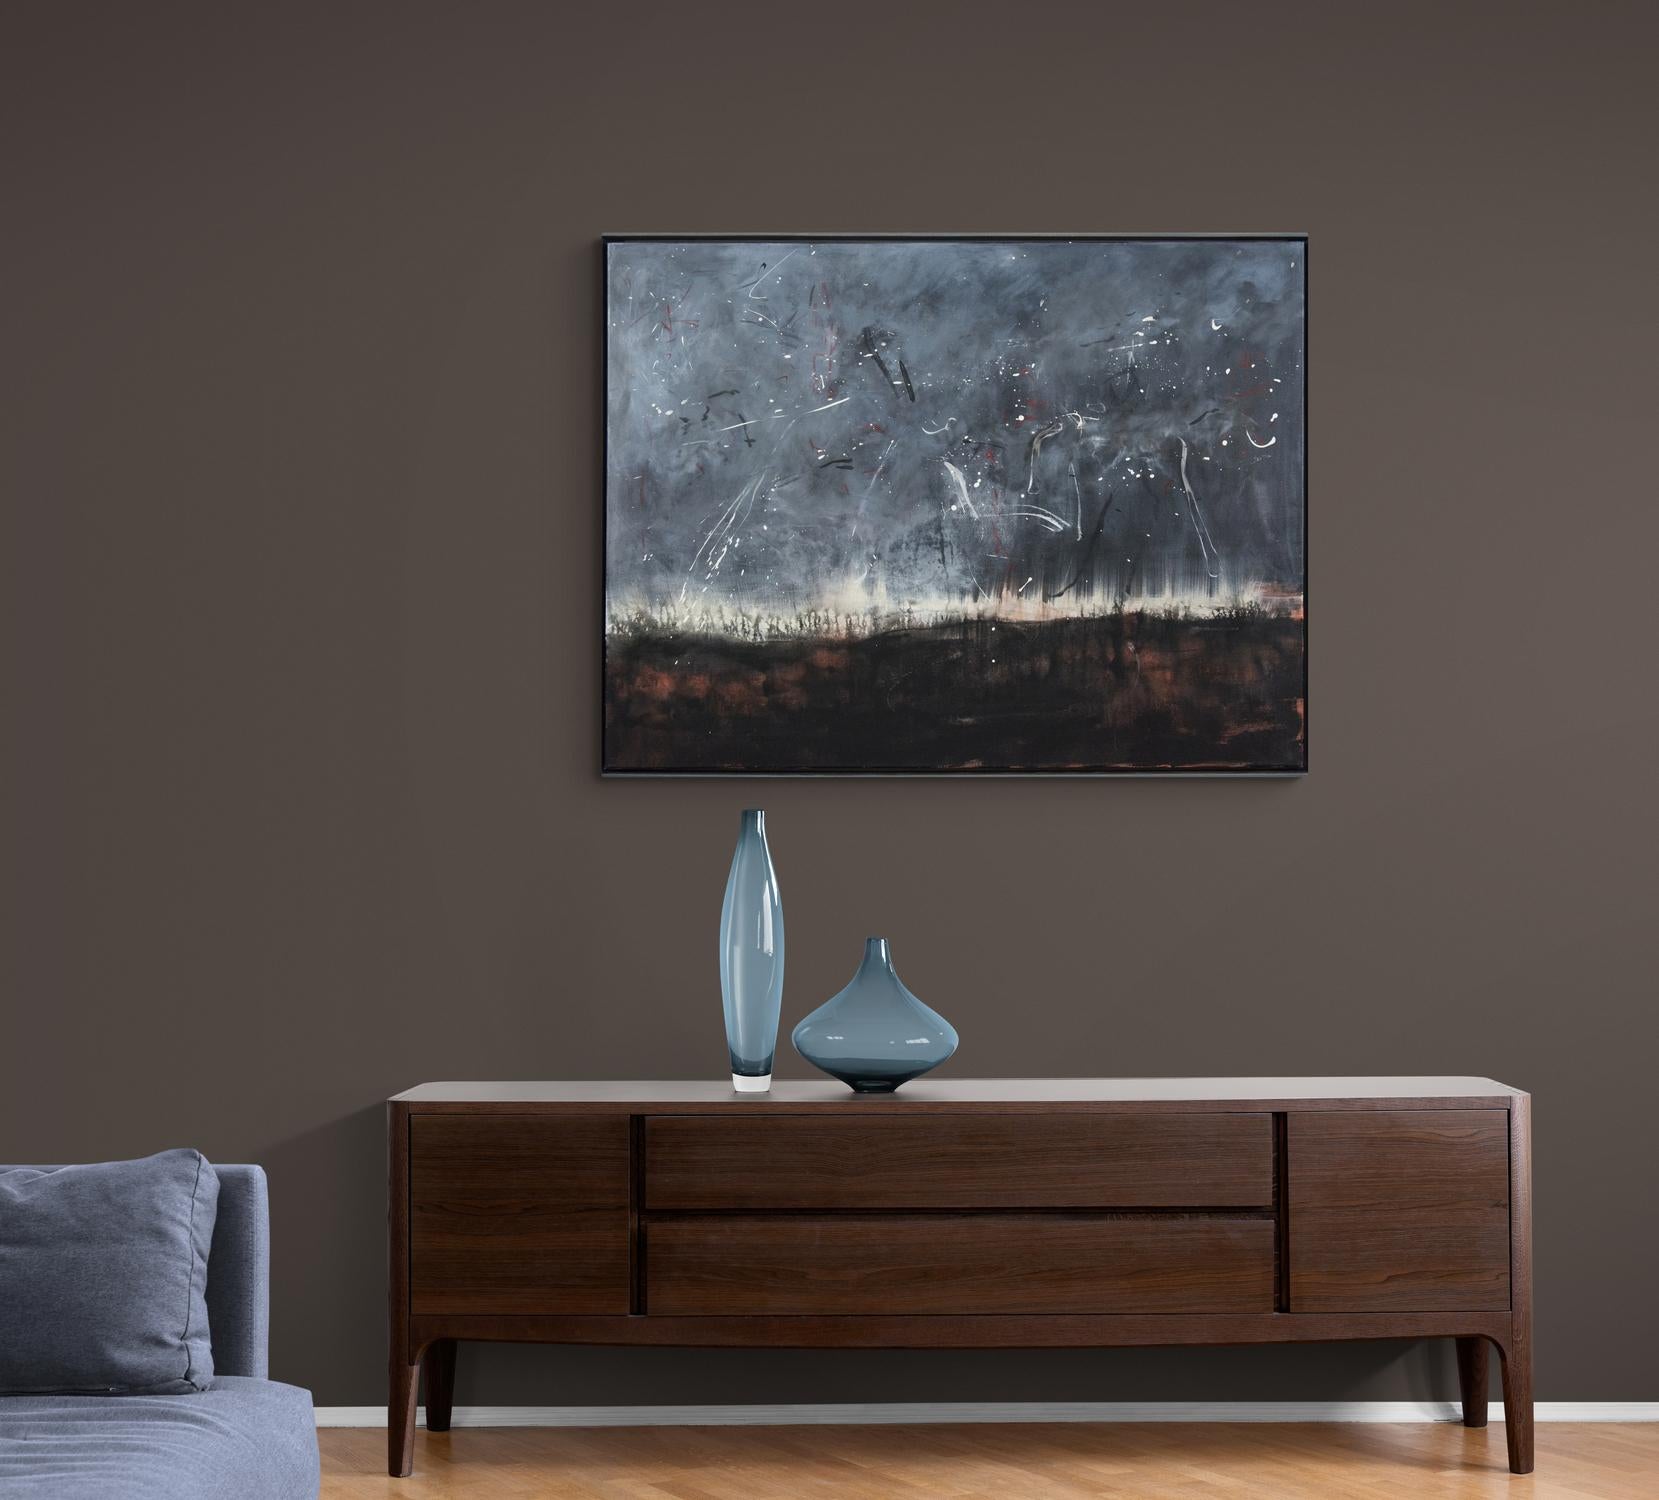 Storm - large, dark, smoky, atmospheric abstracted landscape, acrylic on canvas - Gray Abstract Painting by Lynne Fernie